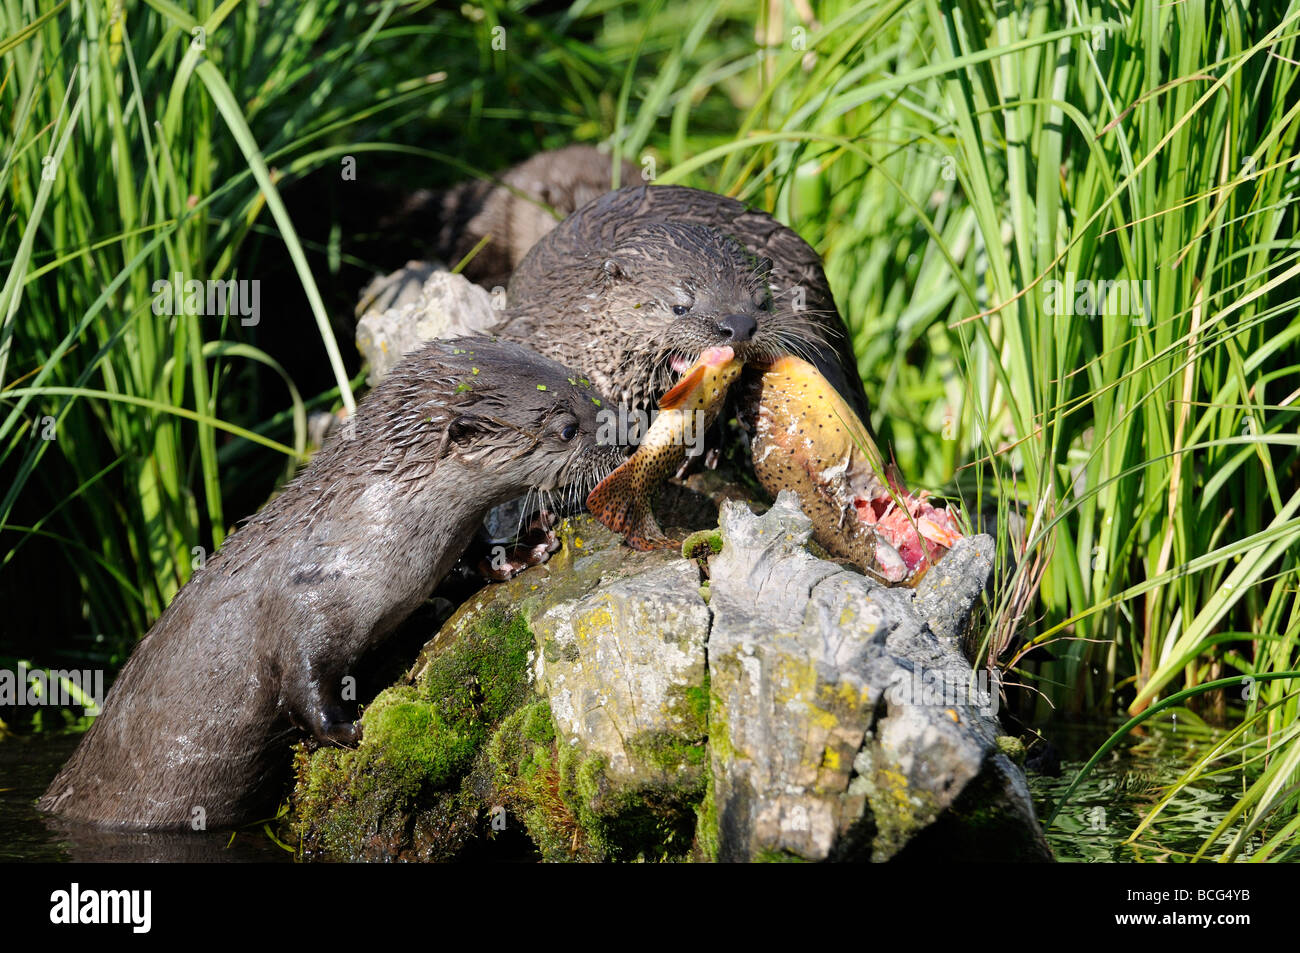 Stock photo of a river otter pup sitting on a log eating a trout, Yellowstone National Park, Montana, 2009. Stock Photo